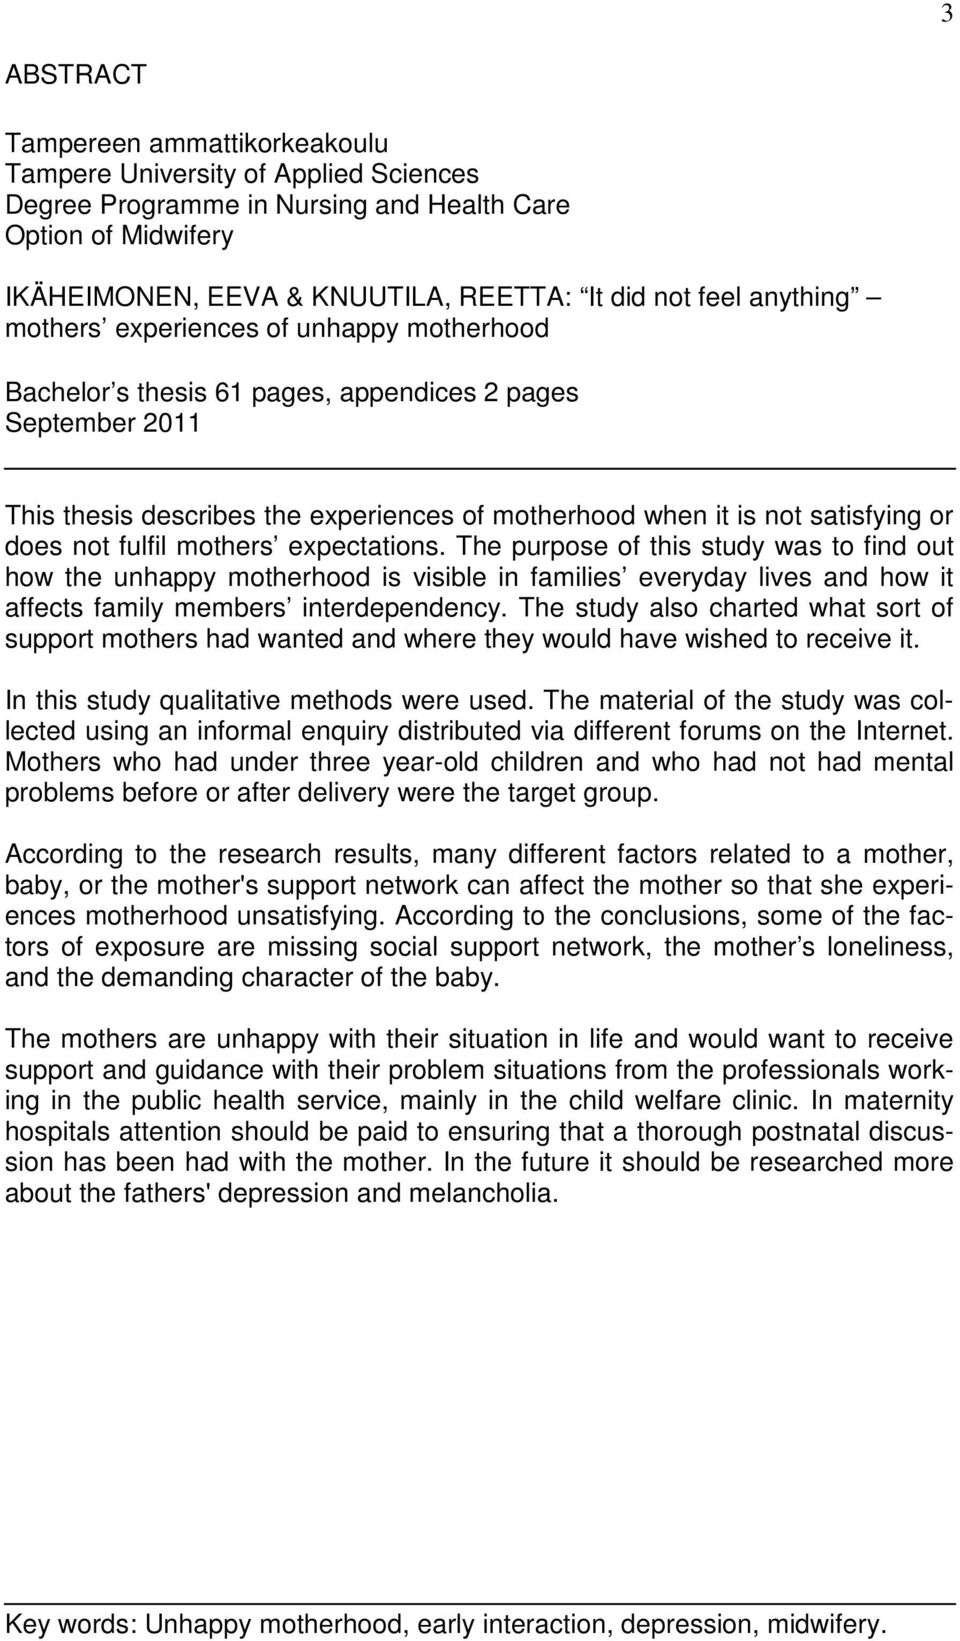 not fulfil mothers expectations. The purpose of this study was to find out how the unhappy motherhood is visible in families everyday lives and how it affects family members interdependency.